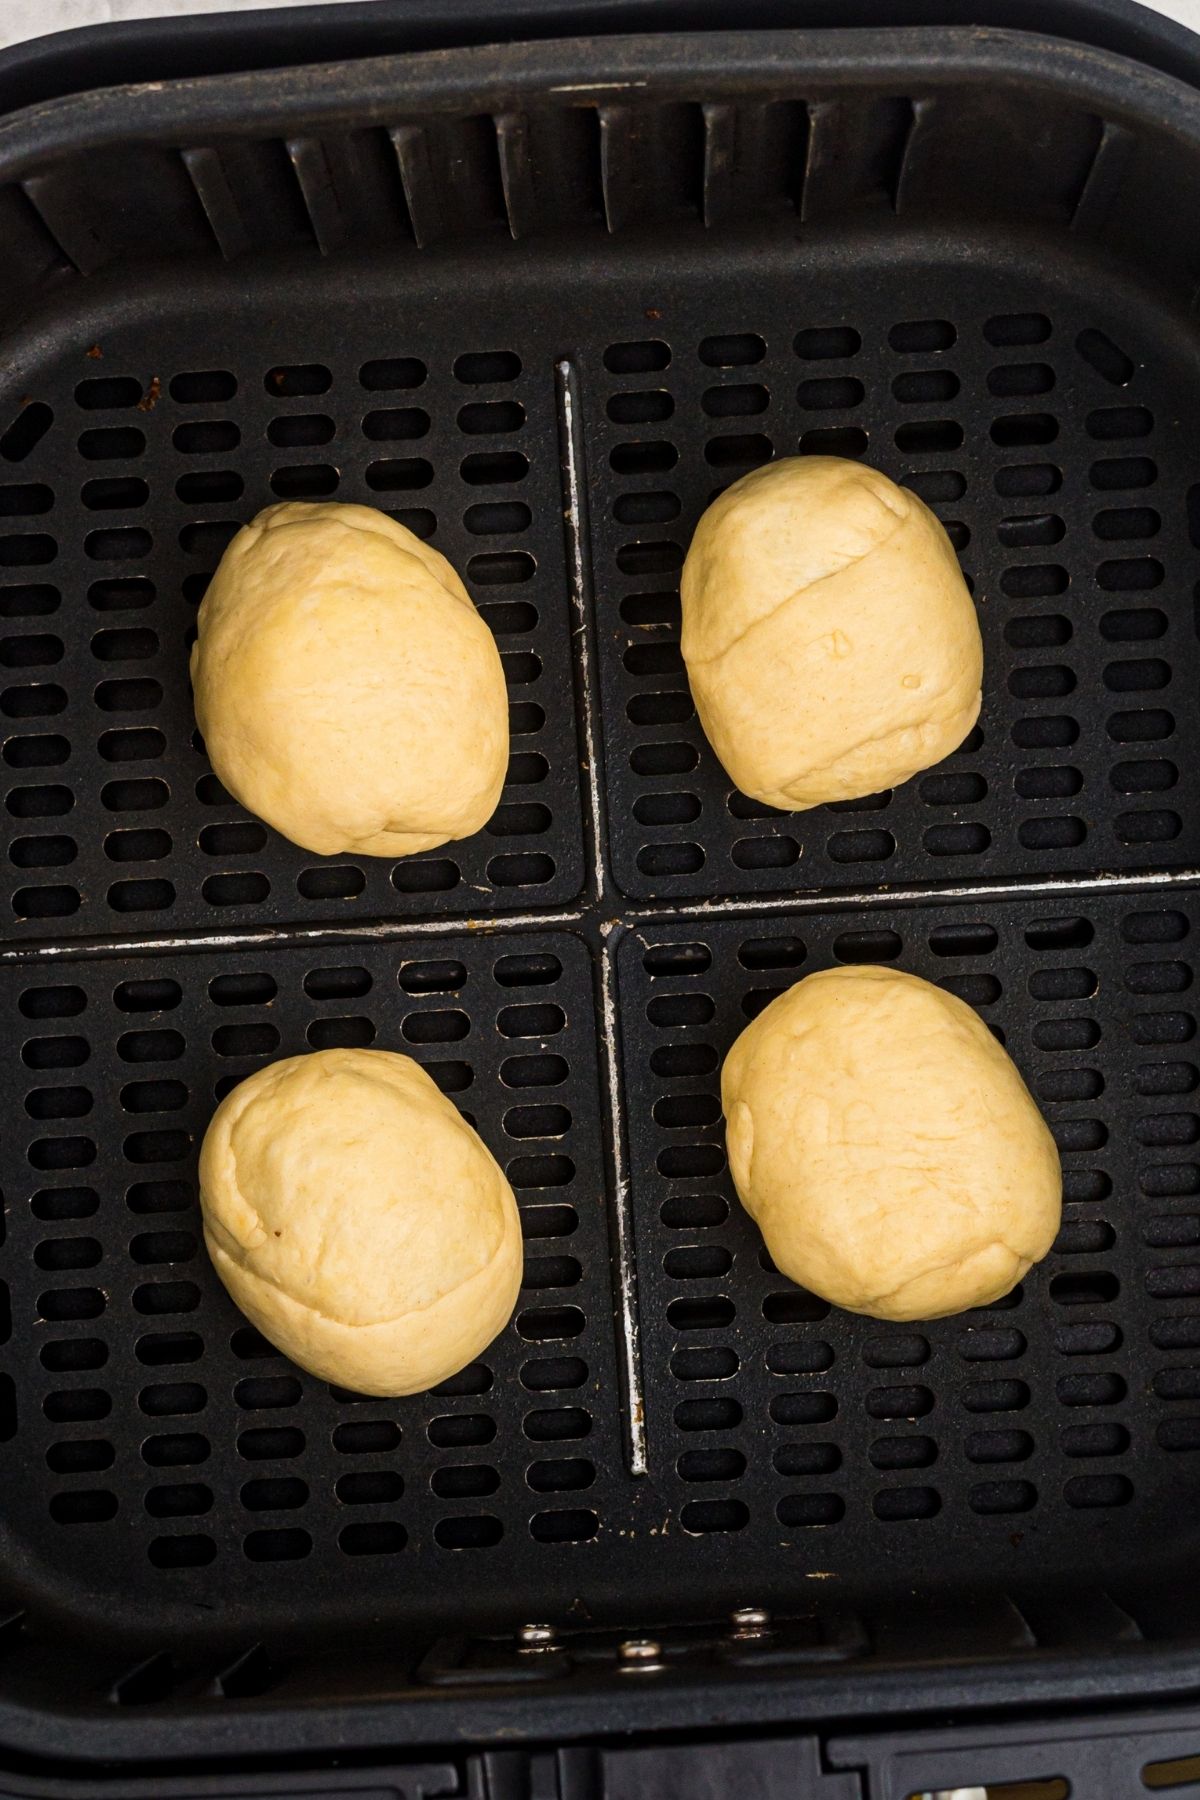 Crescent wrapped cadbury eggs in the air fryer basket before being cooked